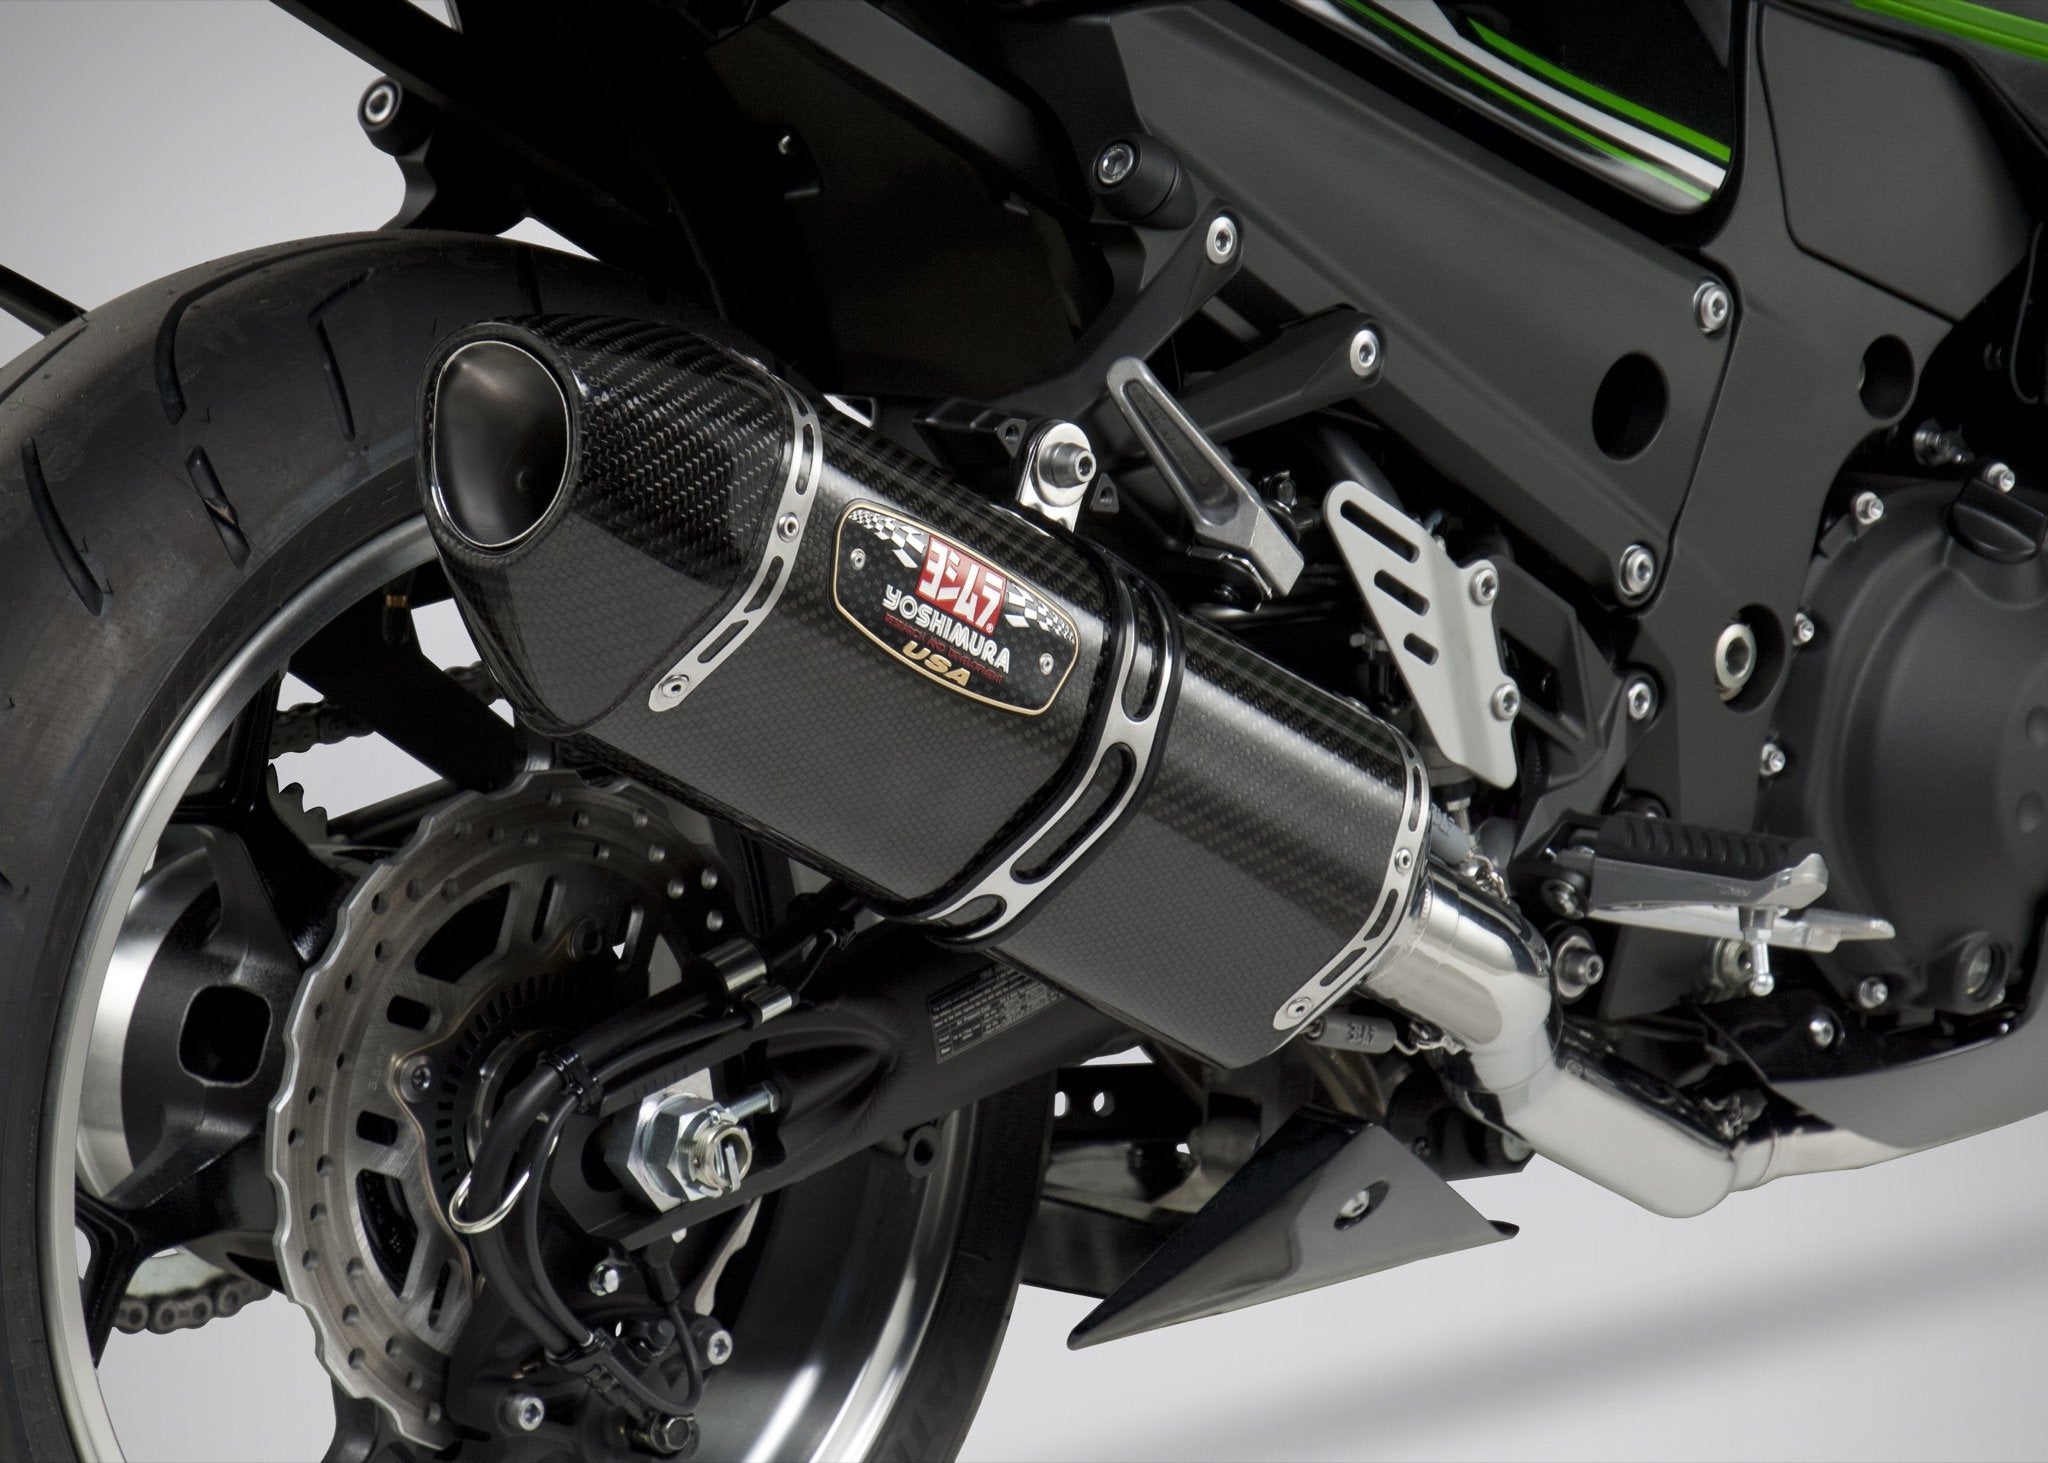 Yoshimura Street Exhaust Systems Race, Full System, R-77, Stainless Steel With Carbon Fiber Sleeve And End Cap